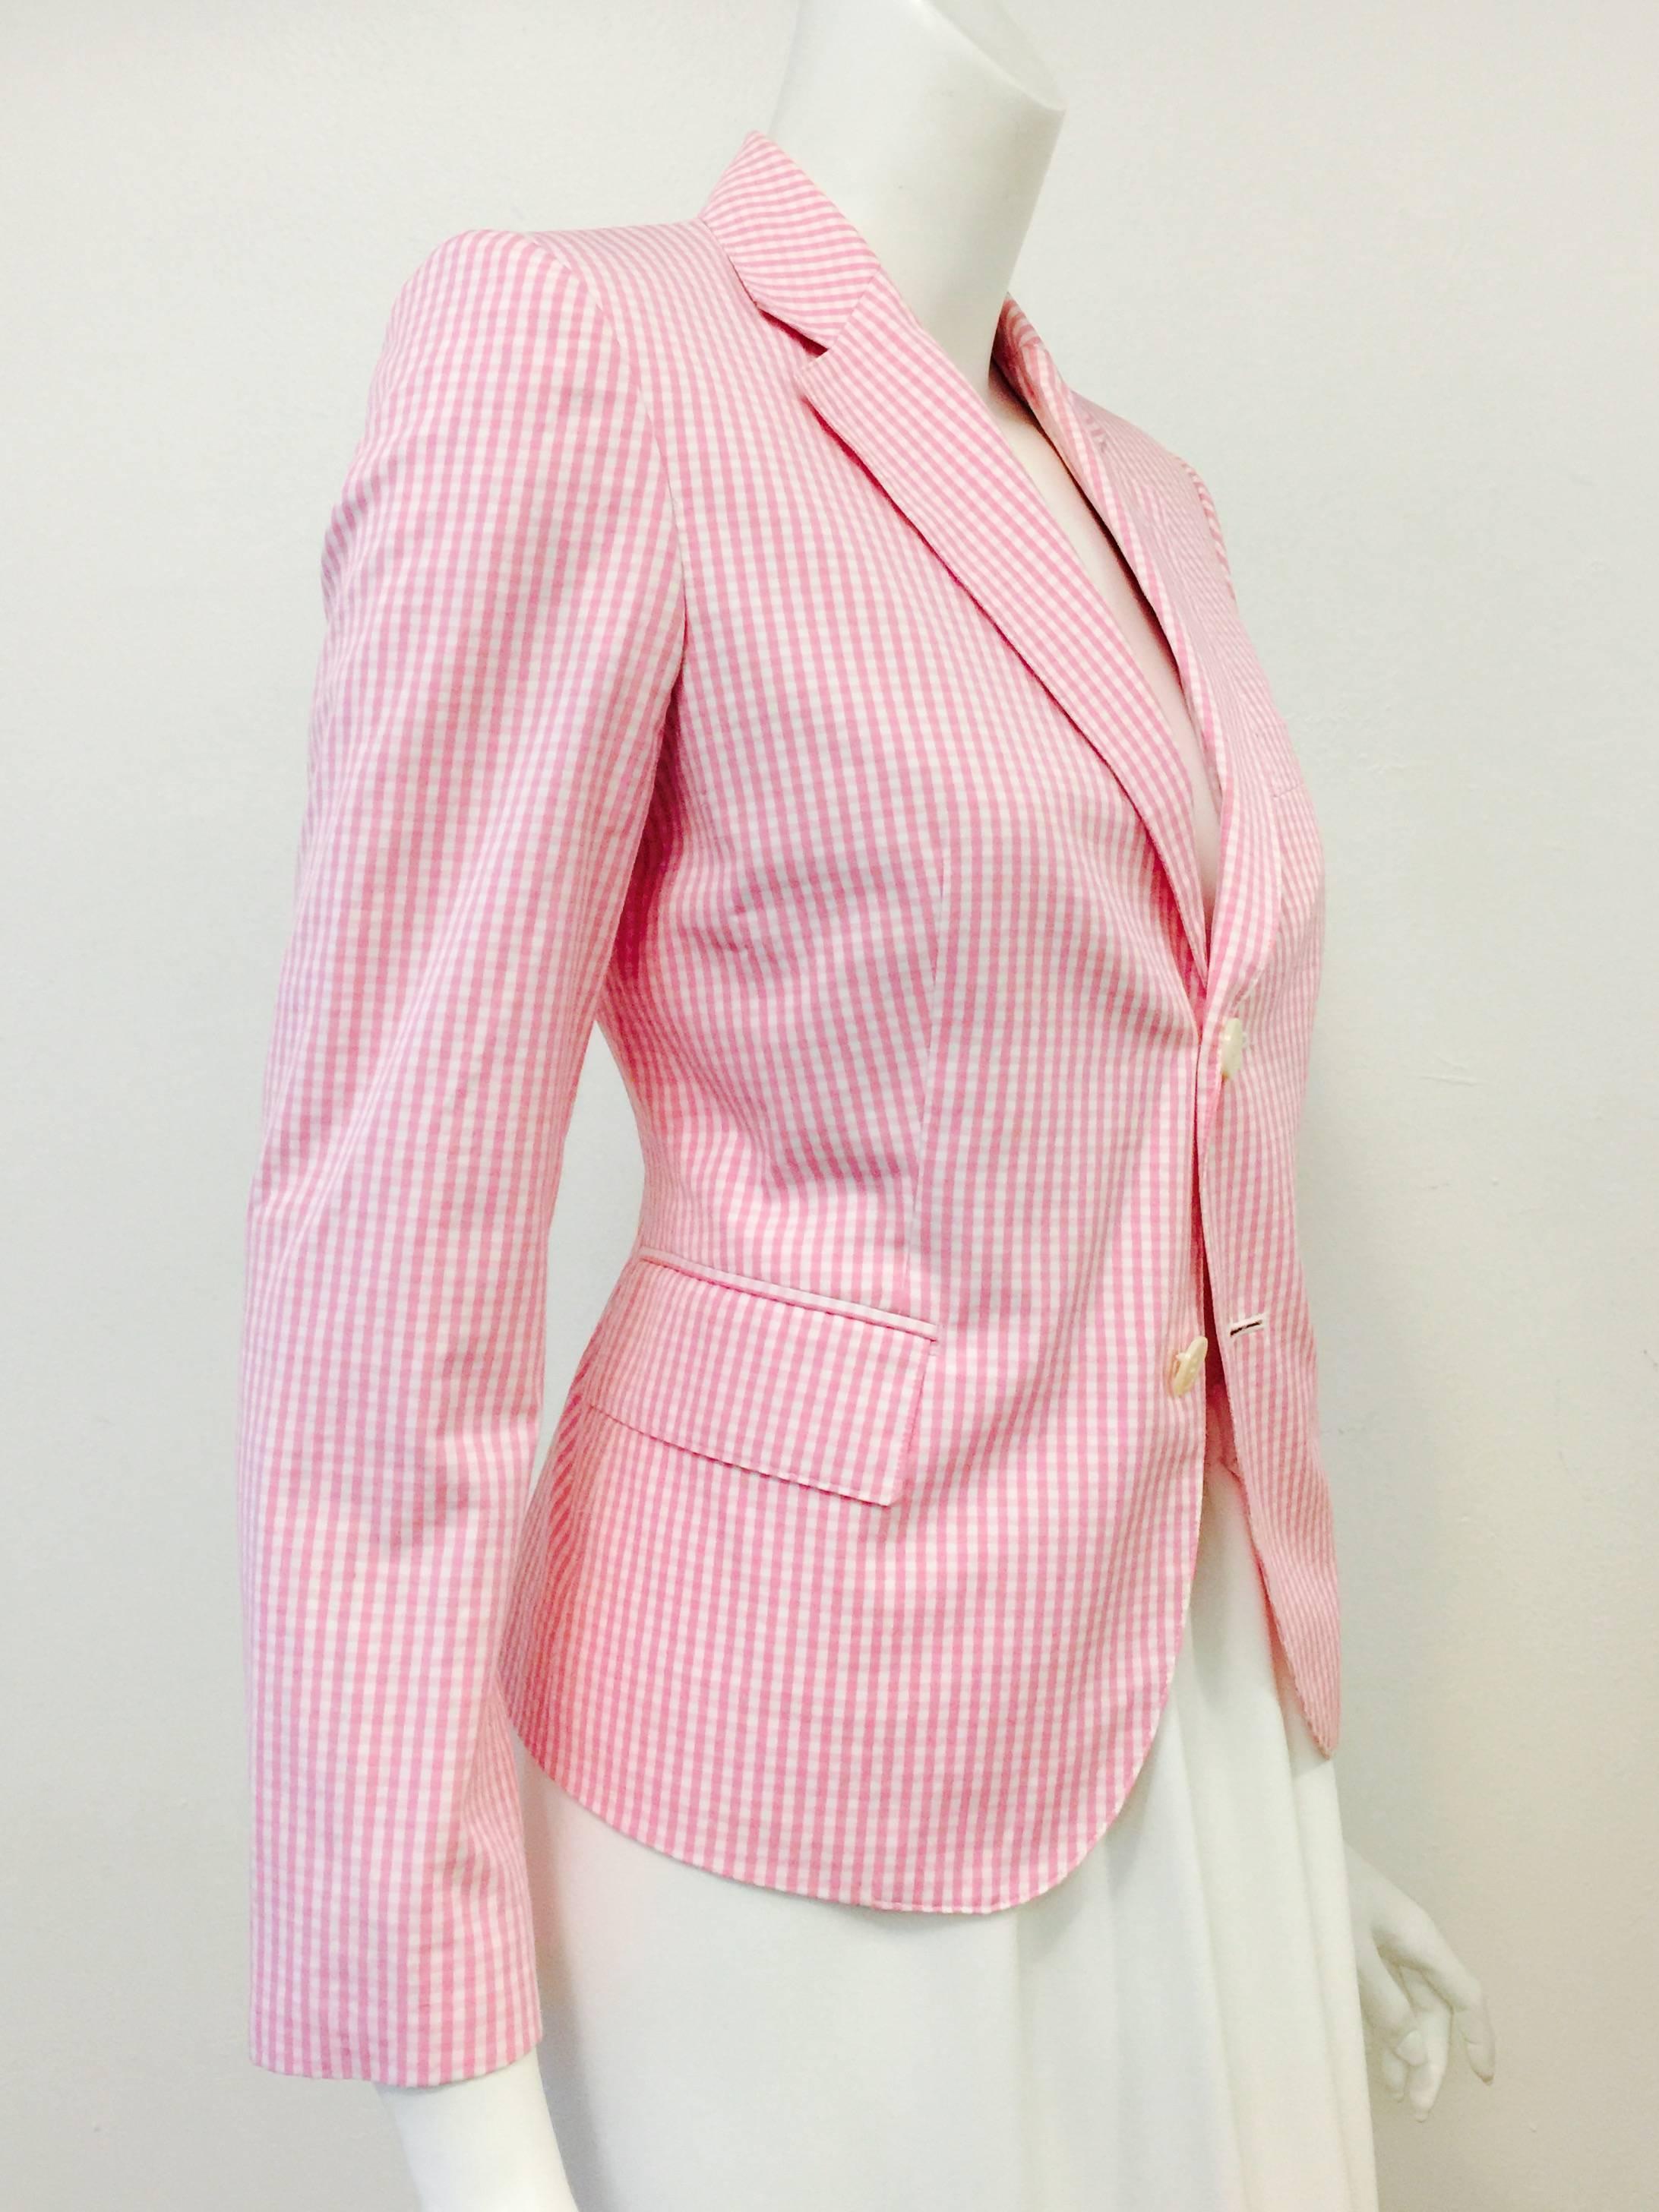 Comme des Garcons Pink and White Gingham Blazer proves that the 